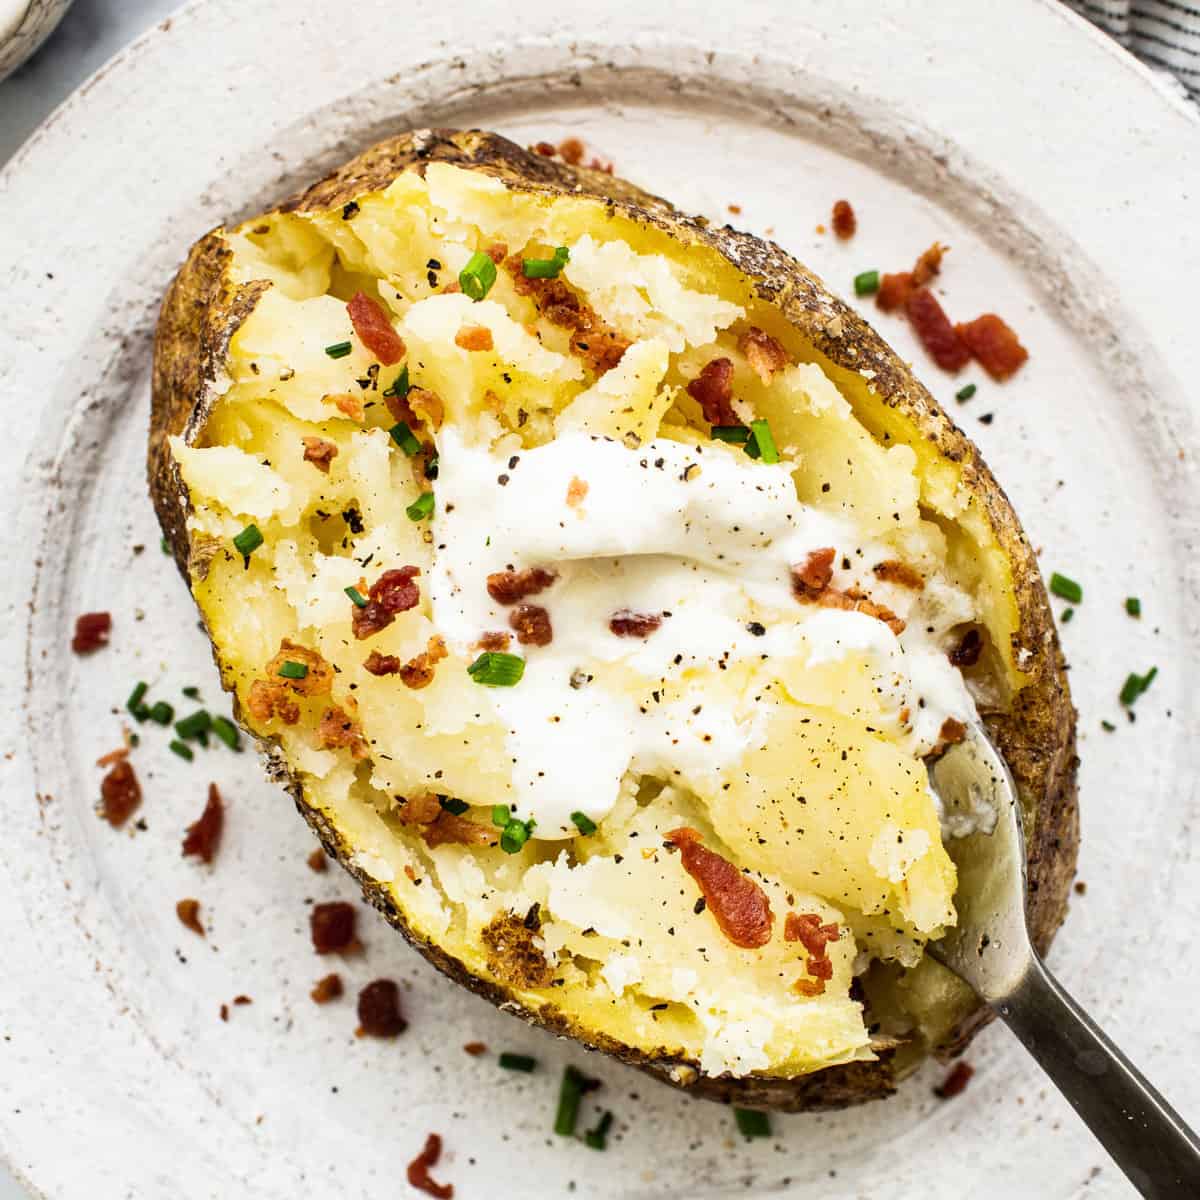 https://fitfoodiefinds.com/wp-content/uploads/2022/12/Micro-Baked-Potato-722-scaled.jpg